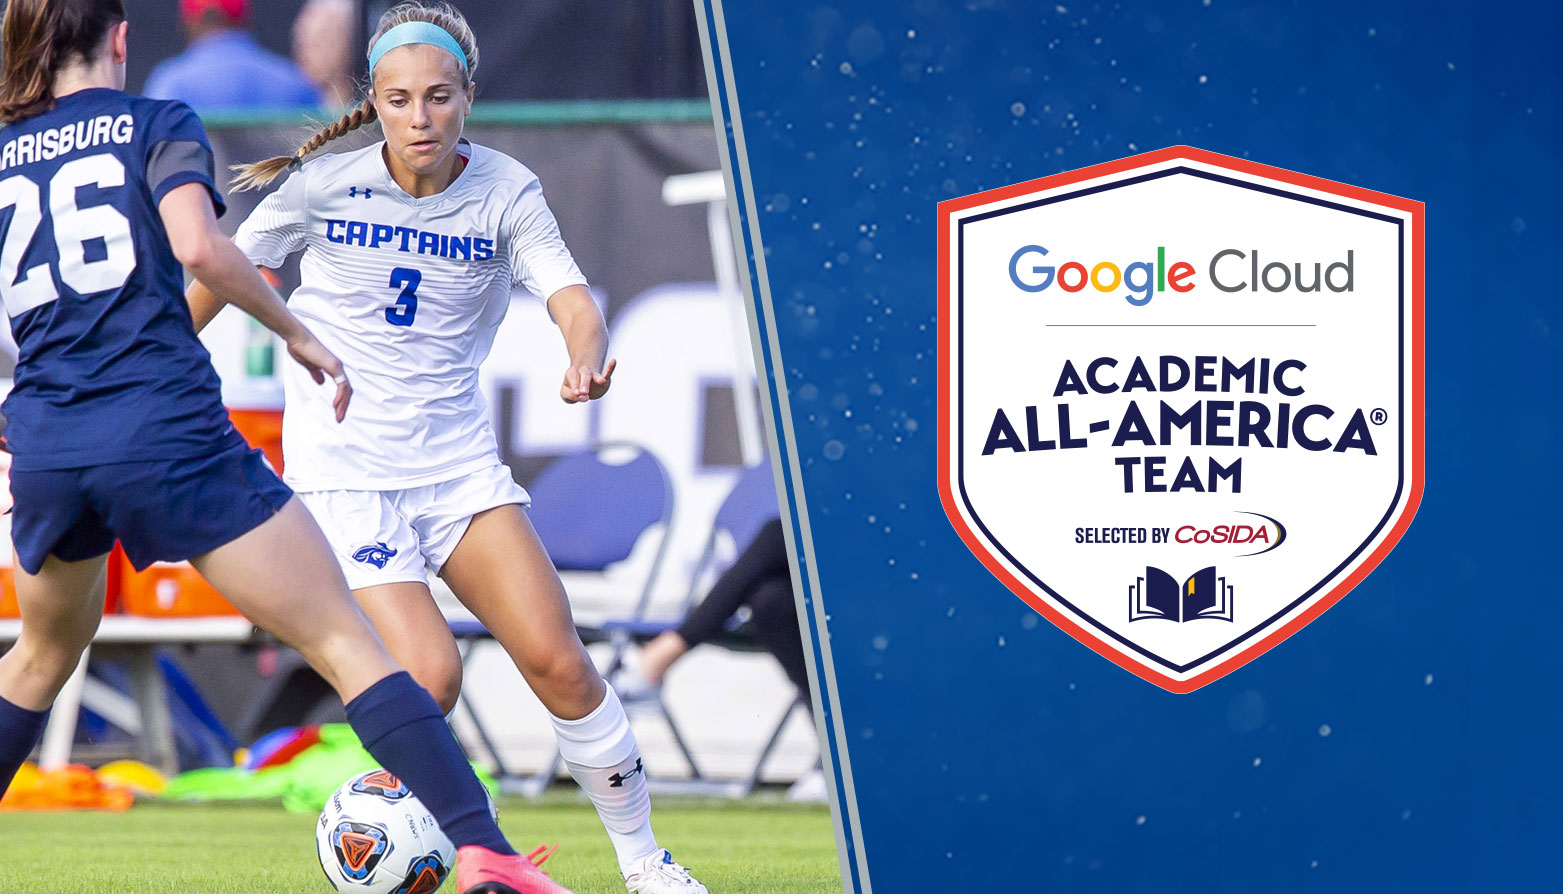 Christopher Newport's Pokorny Achieves Google Cloud Academic First Team All-America Honors